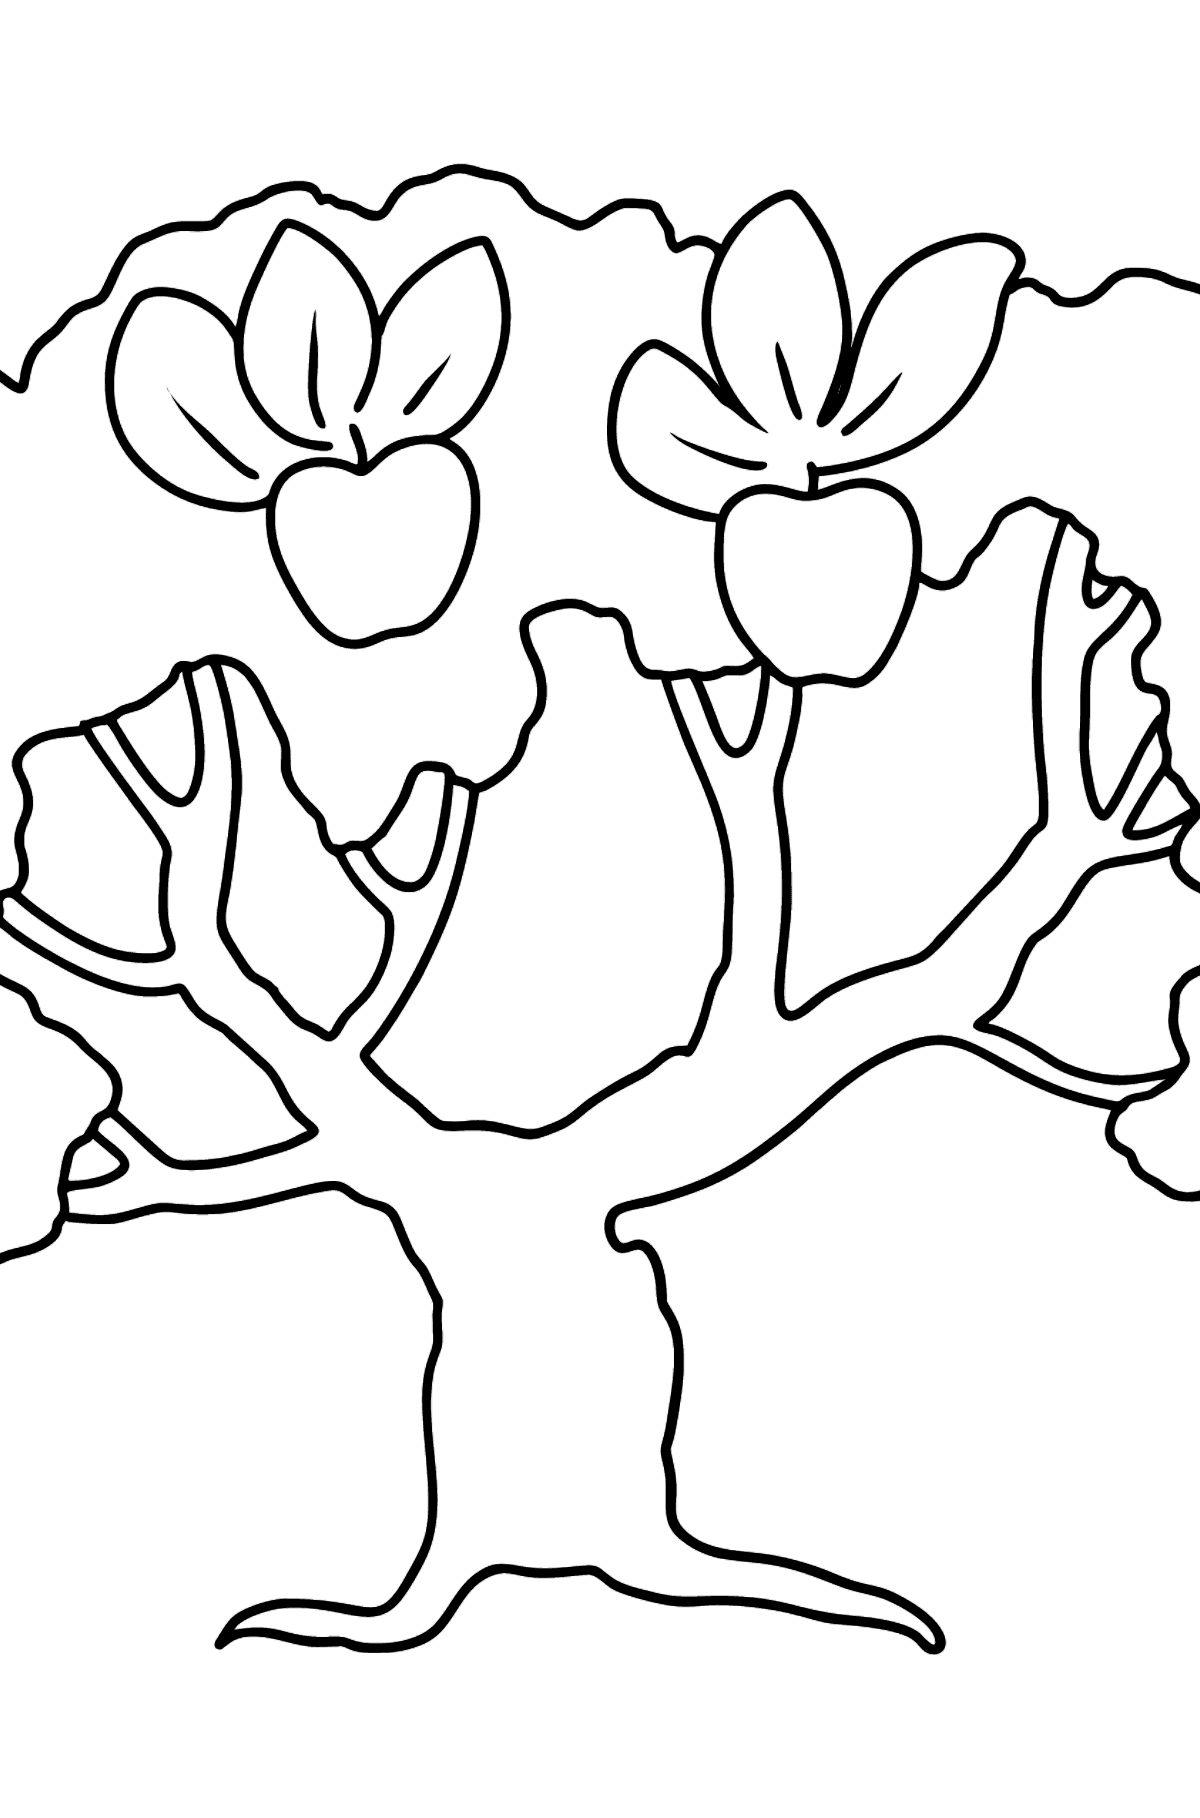 Apple Tree coloring page - Coloring Pages for Kids